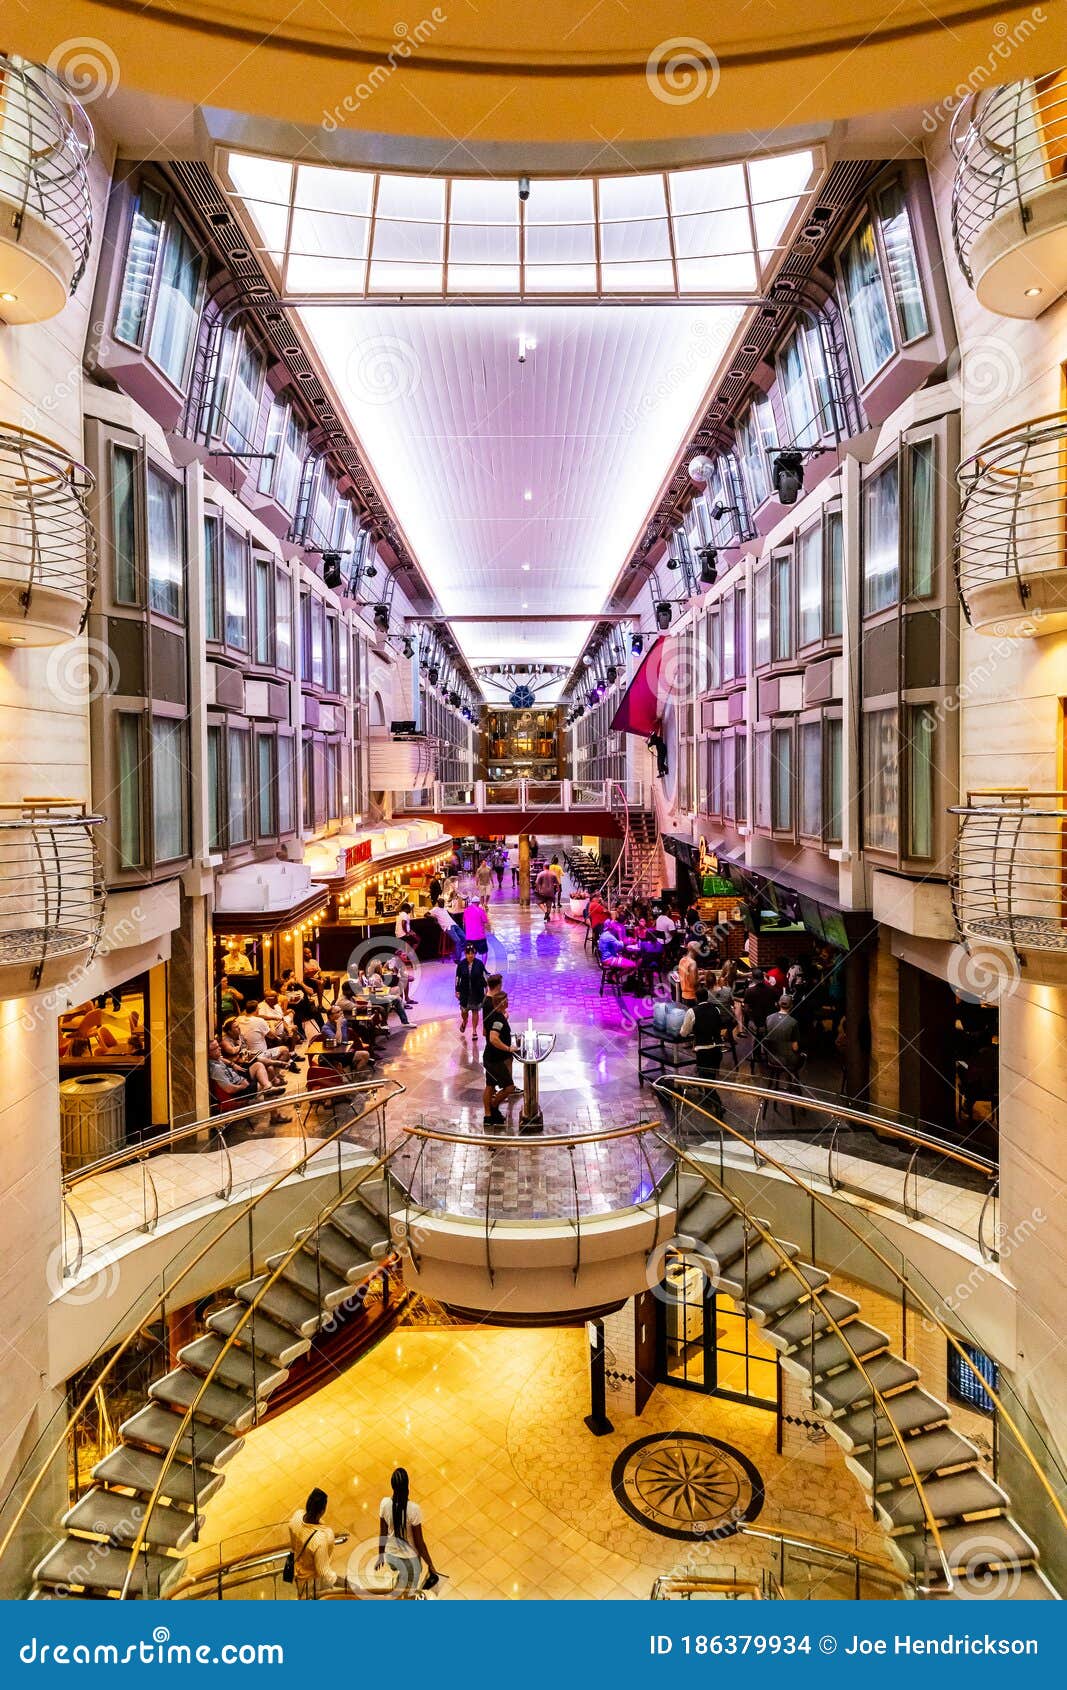 Shopping Mall, Allure of the Seas.